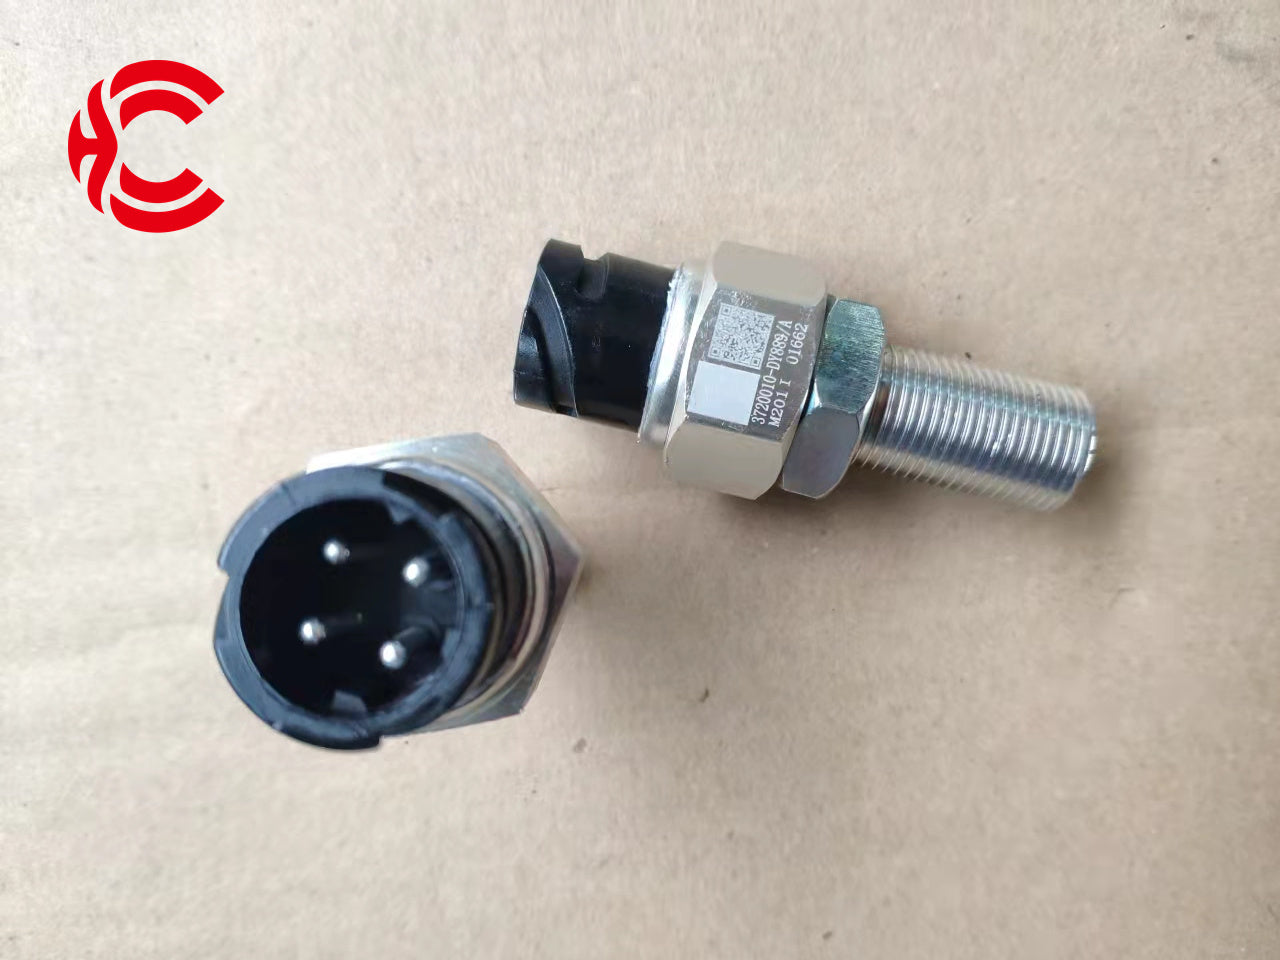 OEM: 3720010-DY889/AMaterial: ABS metalColor: black silverOrigin: Made in ChinaWeight: 100gPacking List: 1* Brake Light Switch More ServiceWe can provide OEM Manufacturing serviceWe can Be your one-step solution for Auto PartsWe can provide technical scheme for you Feel Free to Contact Us, We will get back to you as soon as possible.